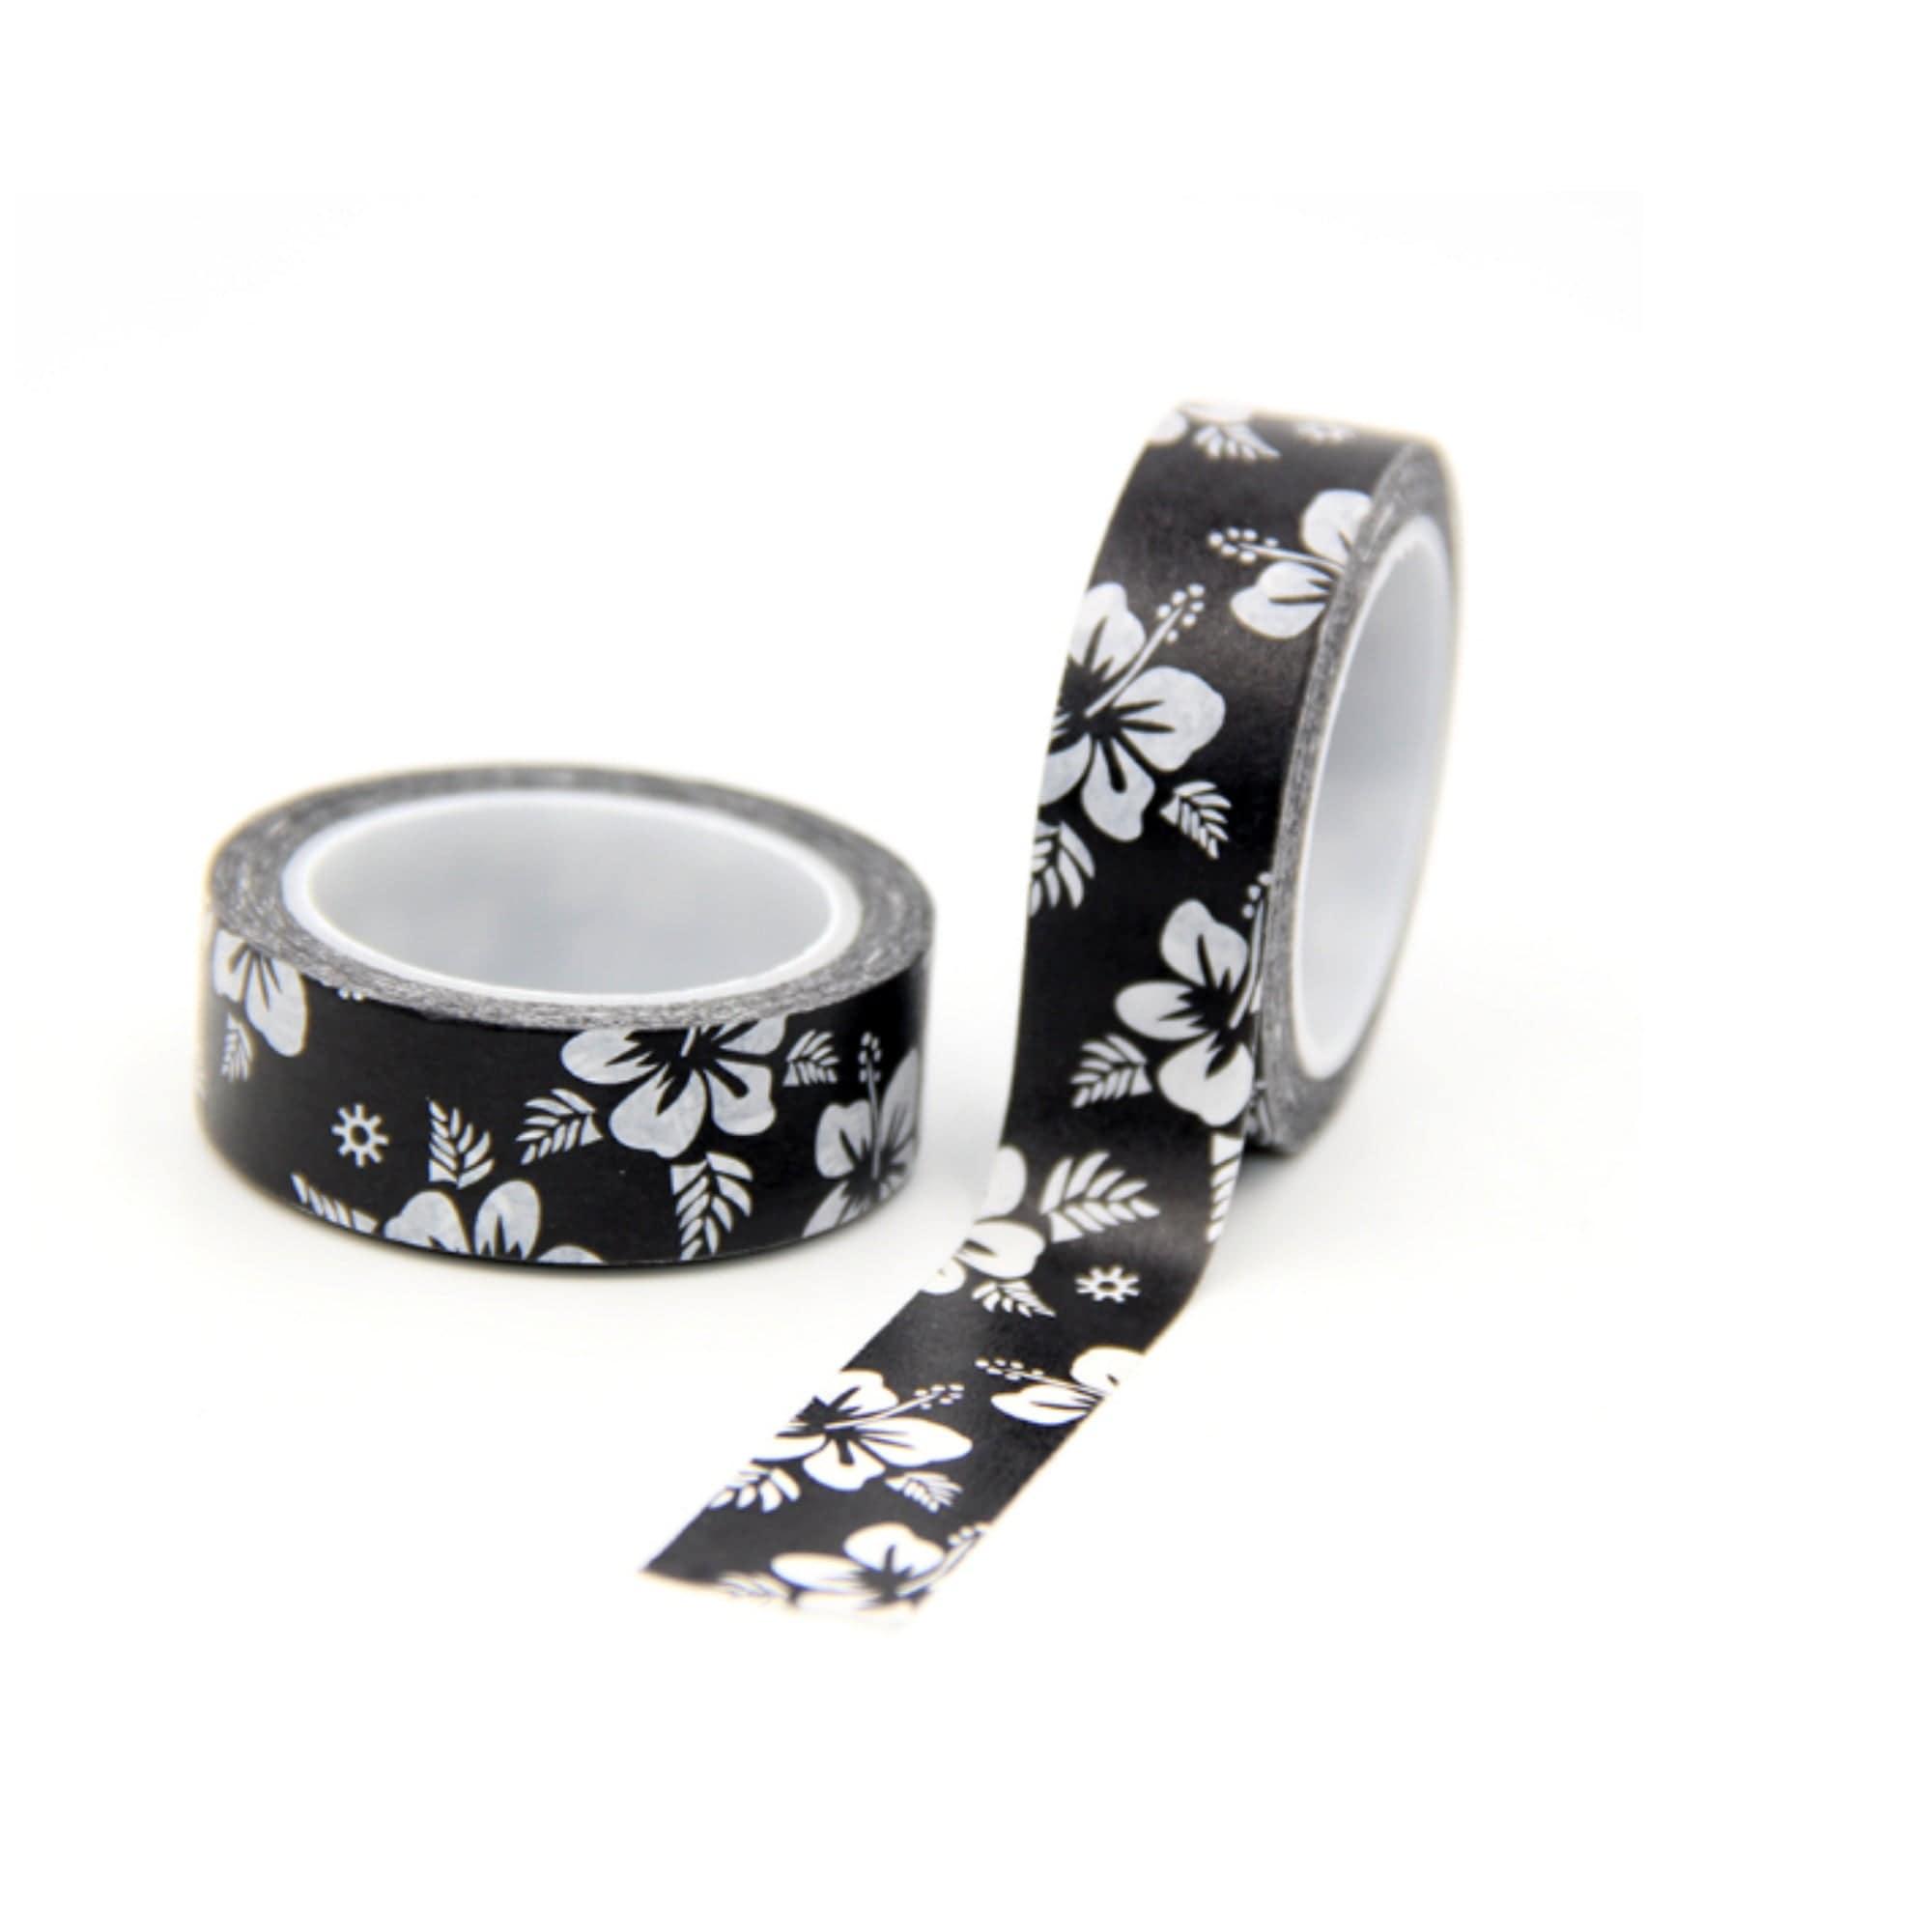 TW Collection White Hibiscus with Black Background Washi Tape by SSC Designs - 15mm x 30 Feet